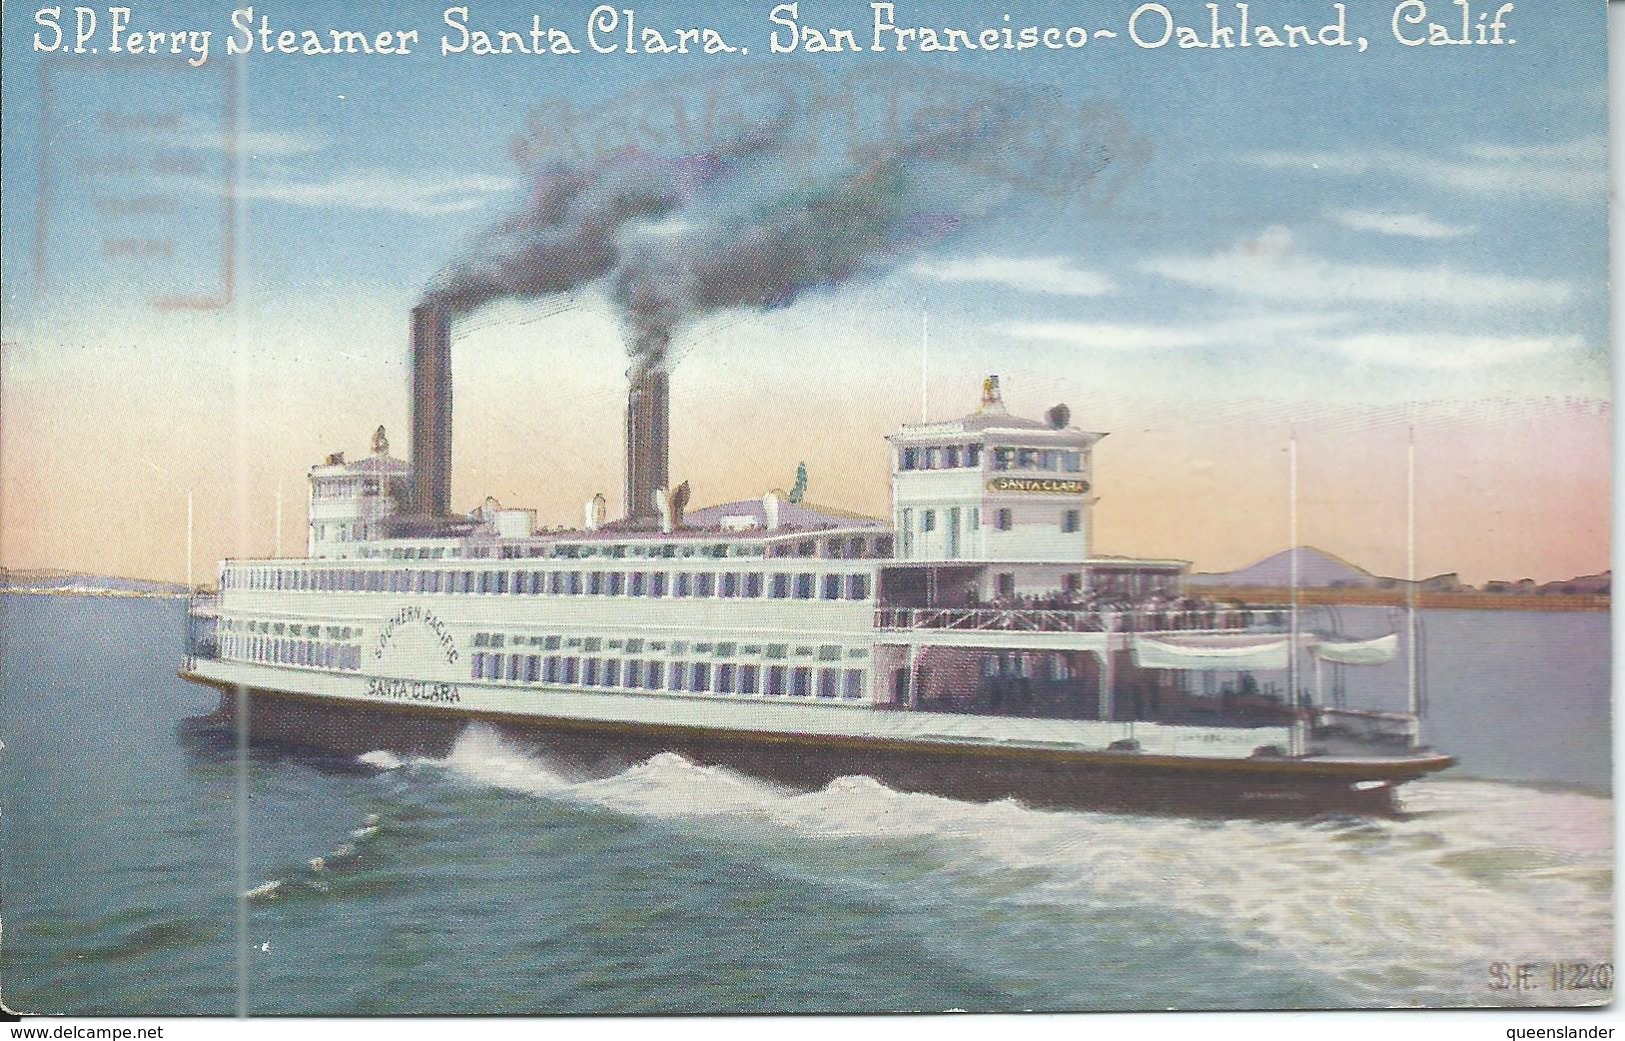 S.P. Ferry Steamer Santa Clara. San Francisco - Oakland Calif Unused Pacific Novelty Con San Fran  Front & Back Shown - Steamers